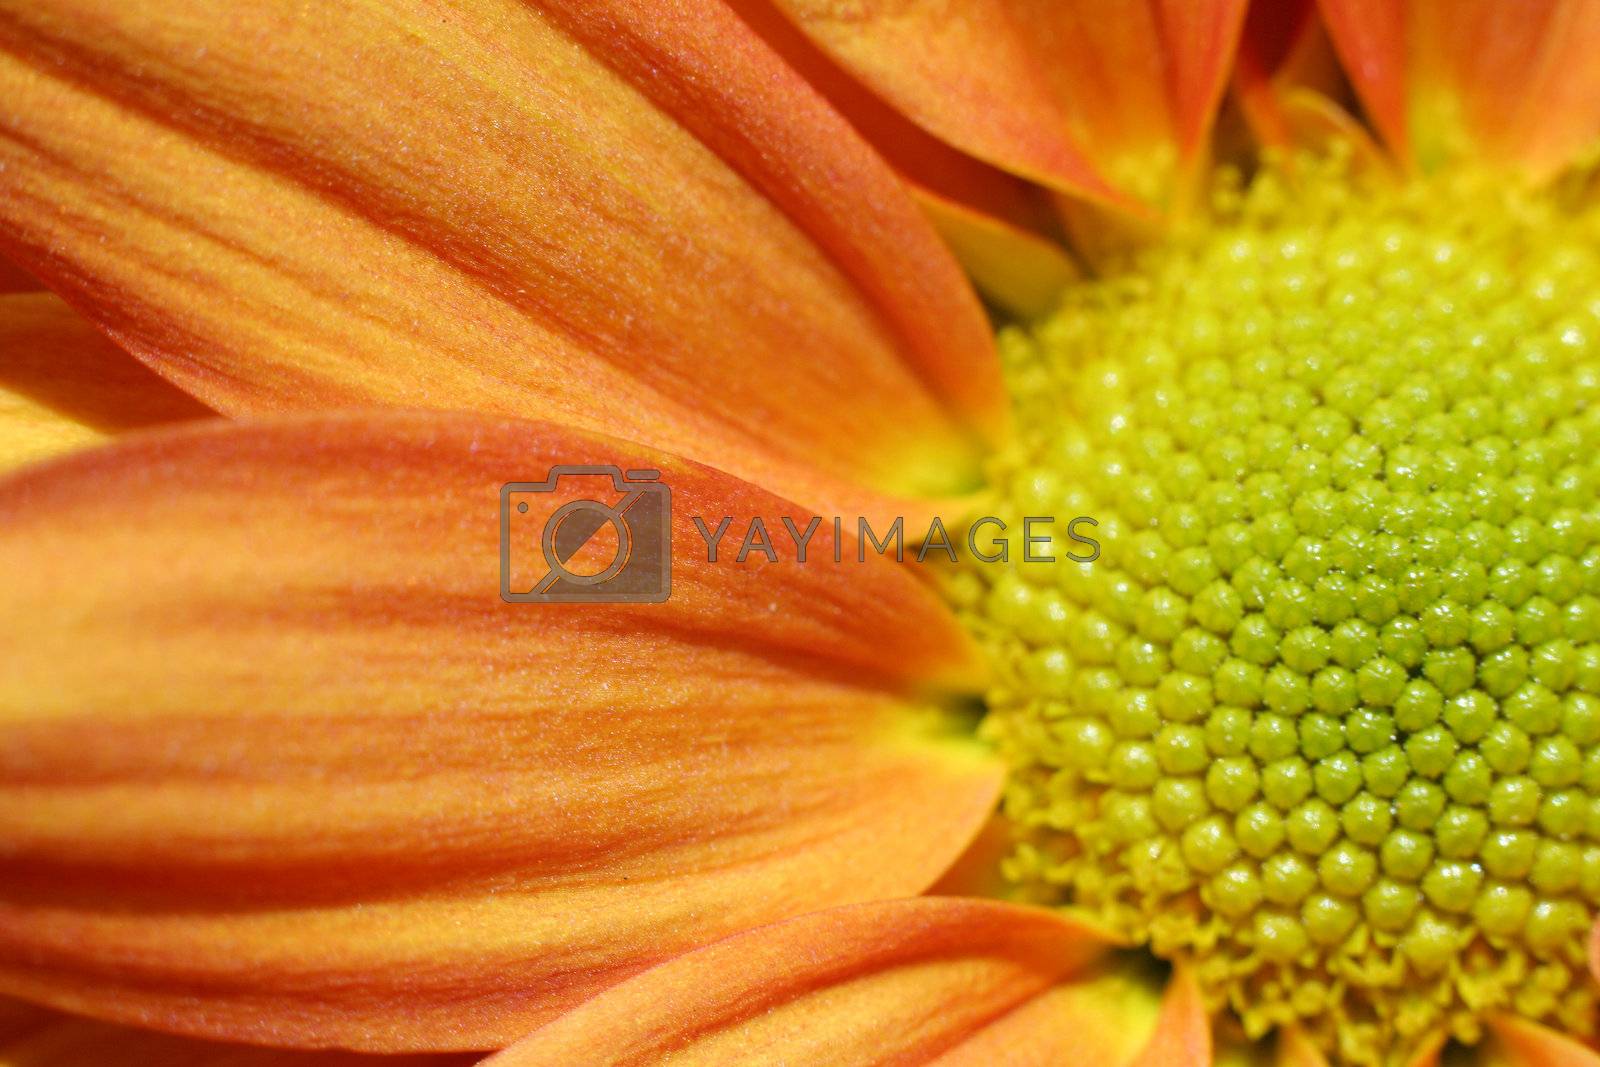 Royalty free image of Autumn Flowers by Hasenonkel